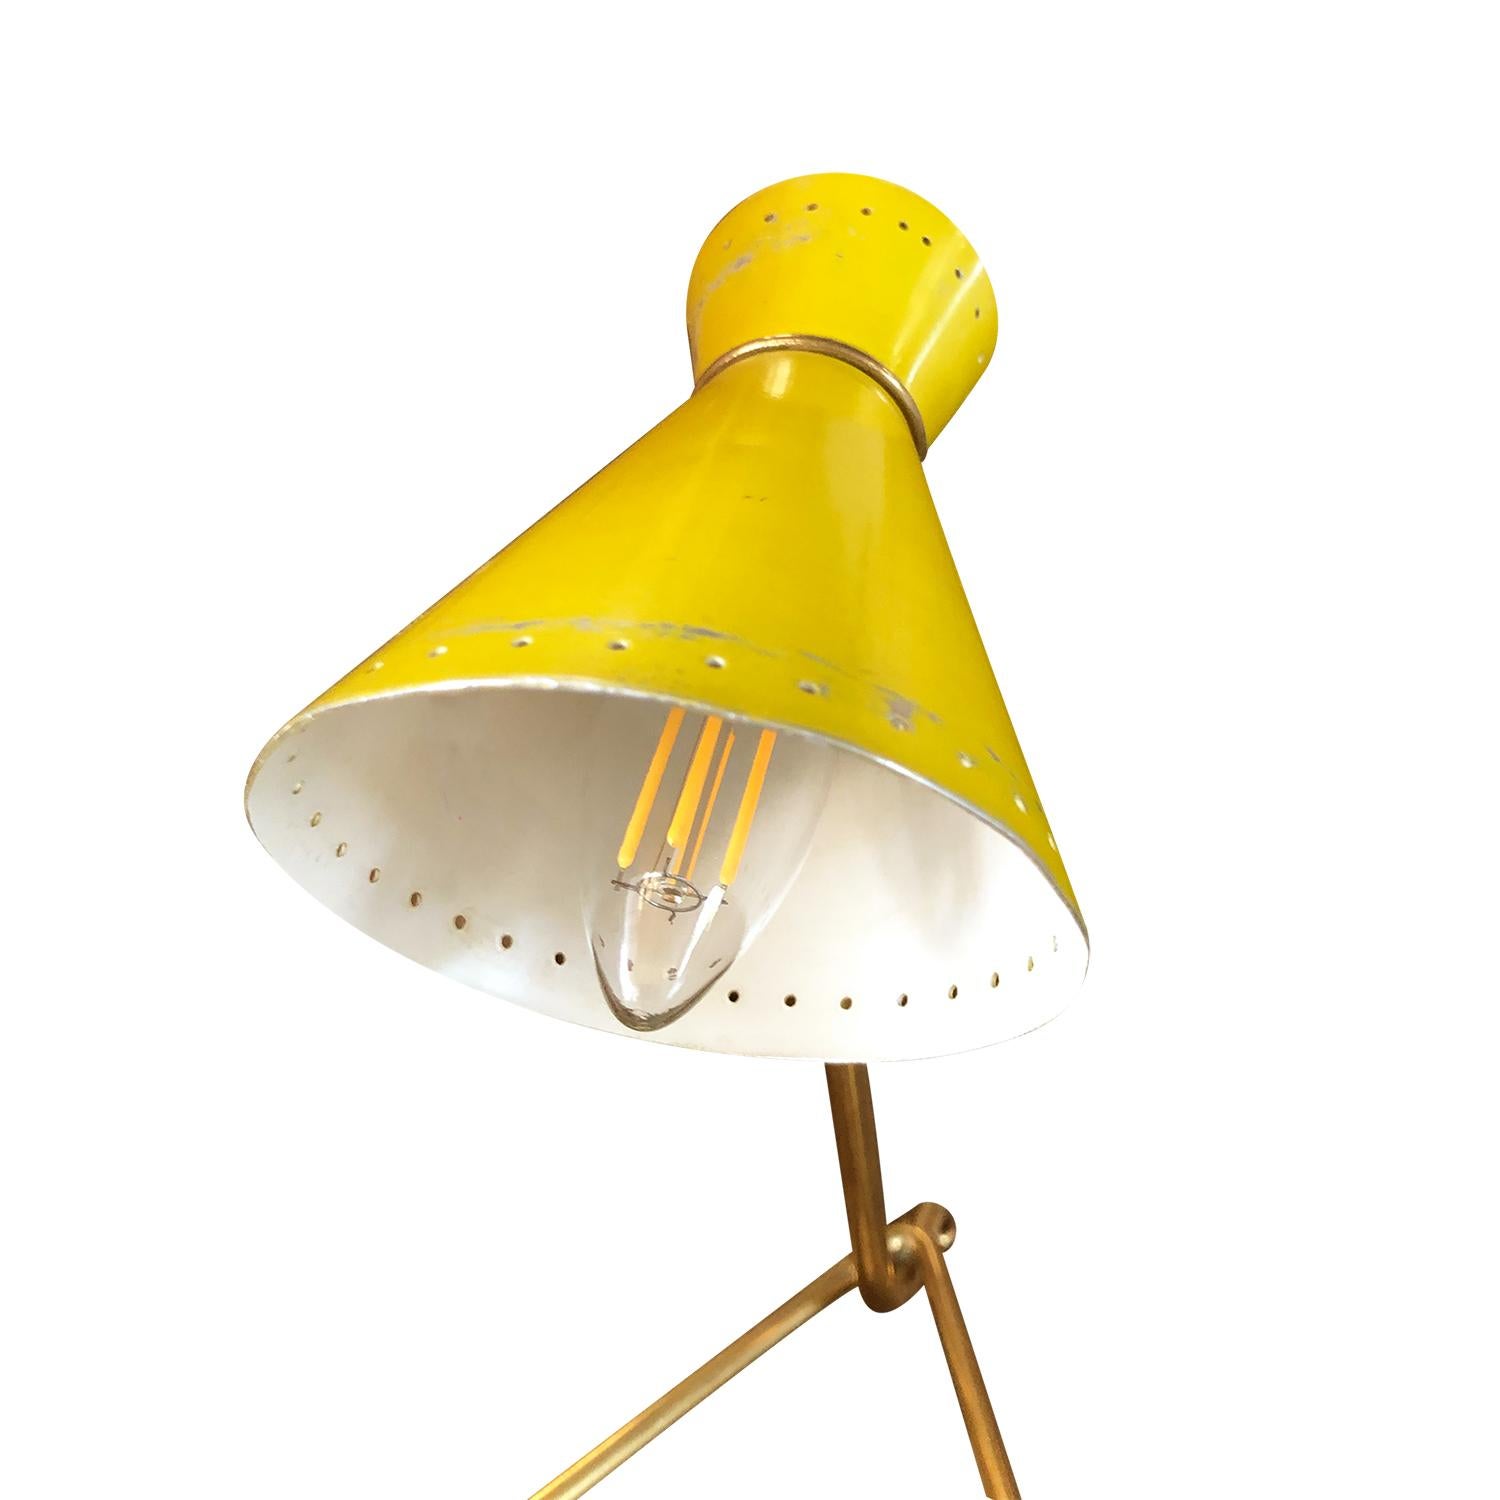 A vintage Mid-Century Modern Italian small desk lamp or table lamp made of a brass base and an adjustable yellow lacquered aluminum shade, featuring a one light socket. Produced by Stilnovo in good condition. The wires have been renewed. Wear